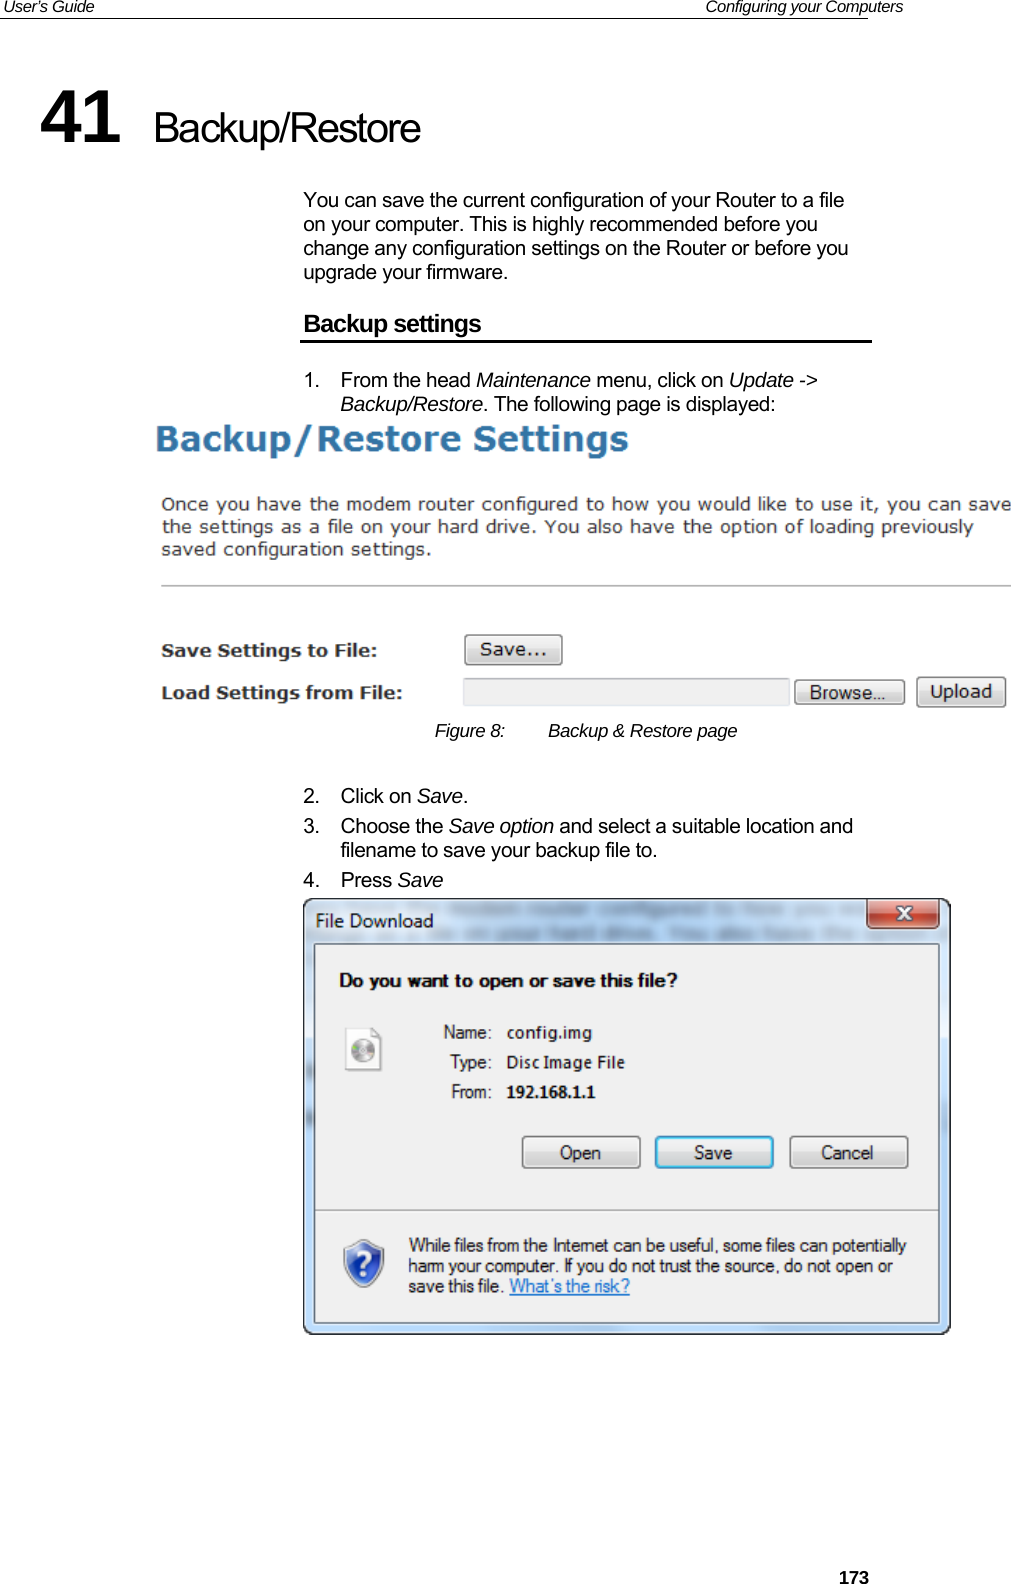 User’s Guide   Configuring your Computers 41  Backup/Restore You can save the current configuration of your Router to a file on your computer. This is highly recommended before you change any configuration settings on the Router or before you upgrade your firmware. Backup settings 1. From the head Maintenance menu, click on Update -&gt; Backup/Restore. The following page is displayed:  Figure 8:  Backup &amp; Restore page  2. Click on Save. 3. Choose the Save option and select a suitable location and filename to save your backup file to. 4. Press Save      173